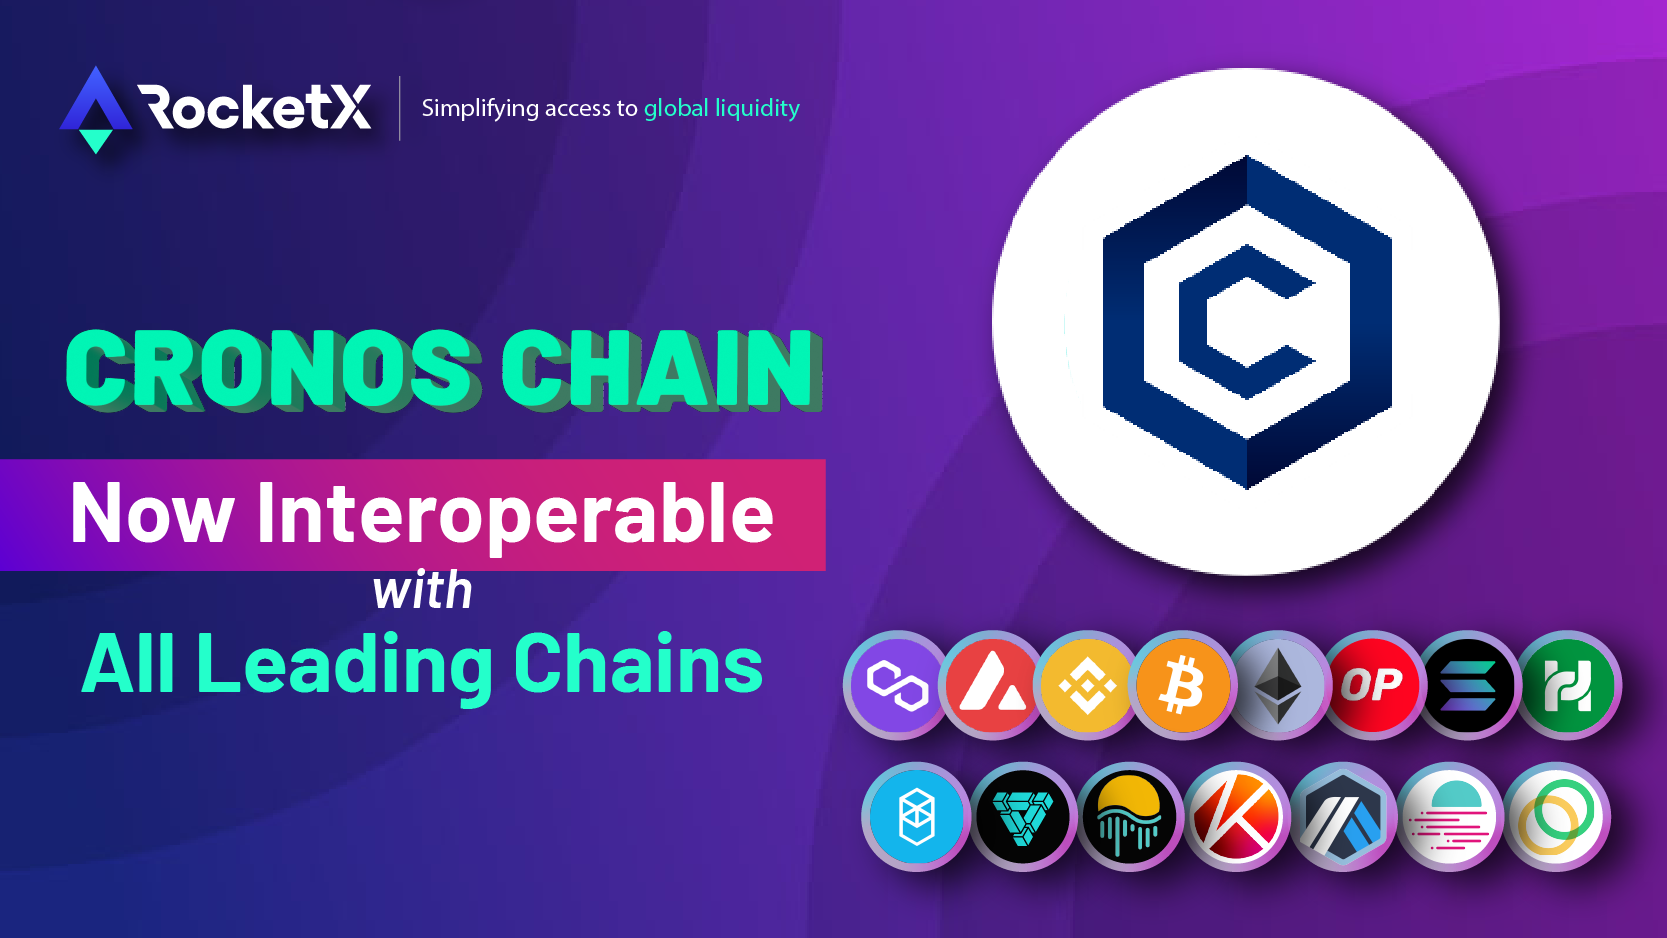 Cronos Chain is now LIVE on RocketX, the revolutionary decentralized hybrid exchange platform that allows users to seamlessly exchange cryptocurrencies between various networks, including Bitcoin, Ethereum, Polygon Matic, and 18 other major blockchain networks.